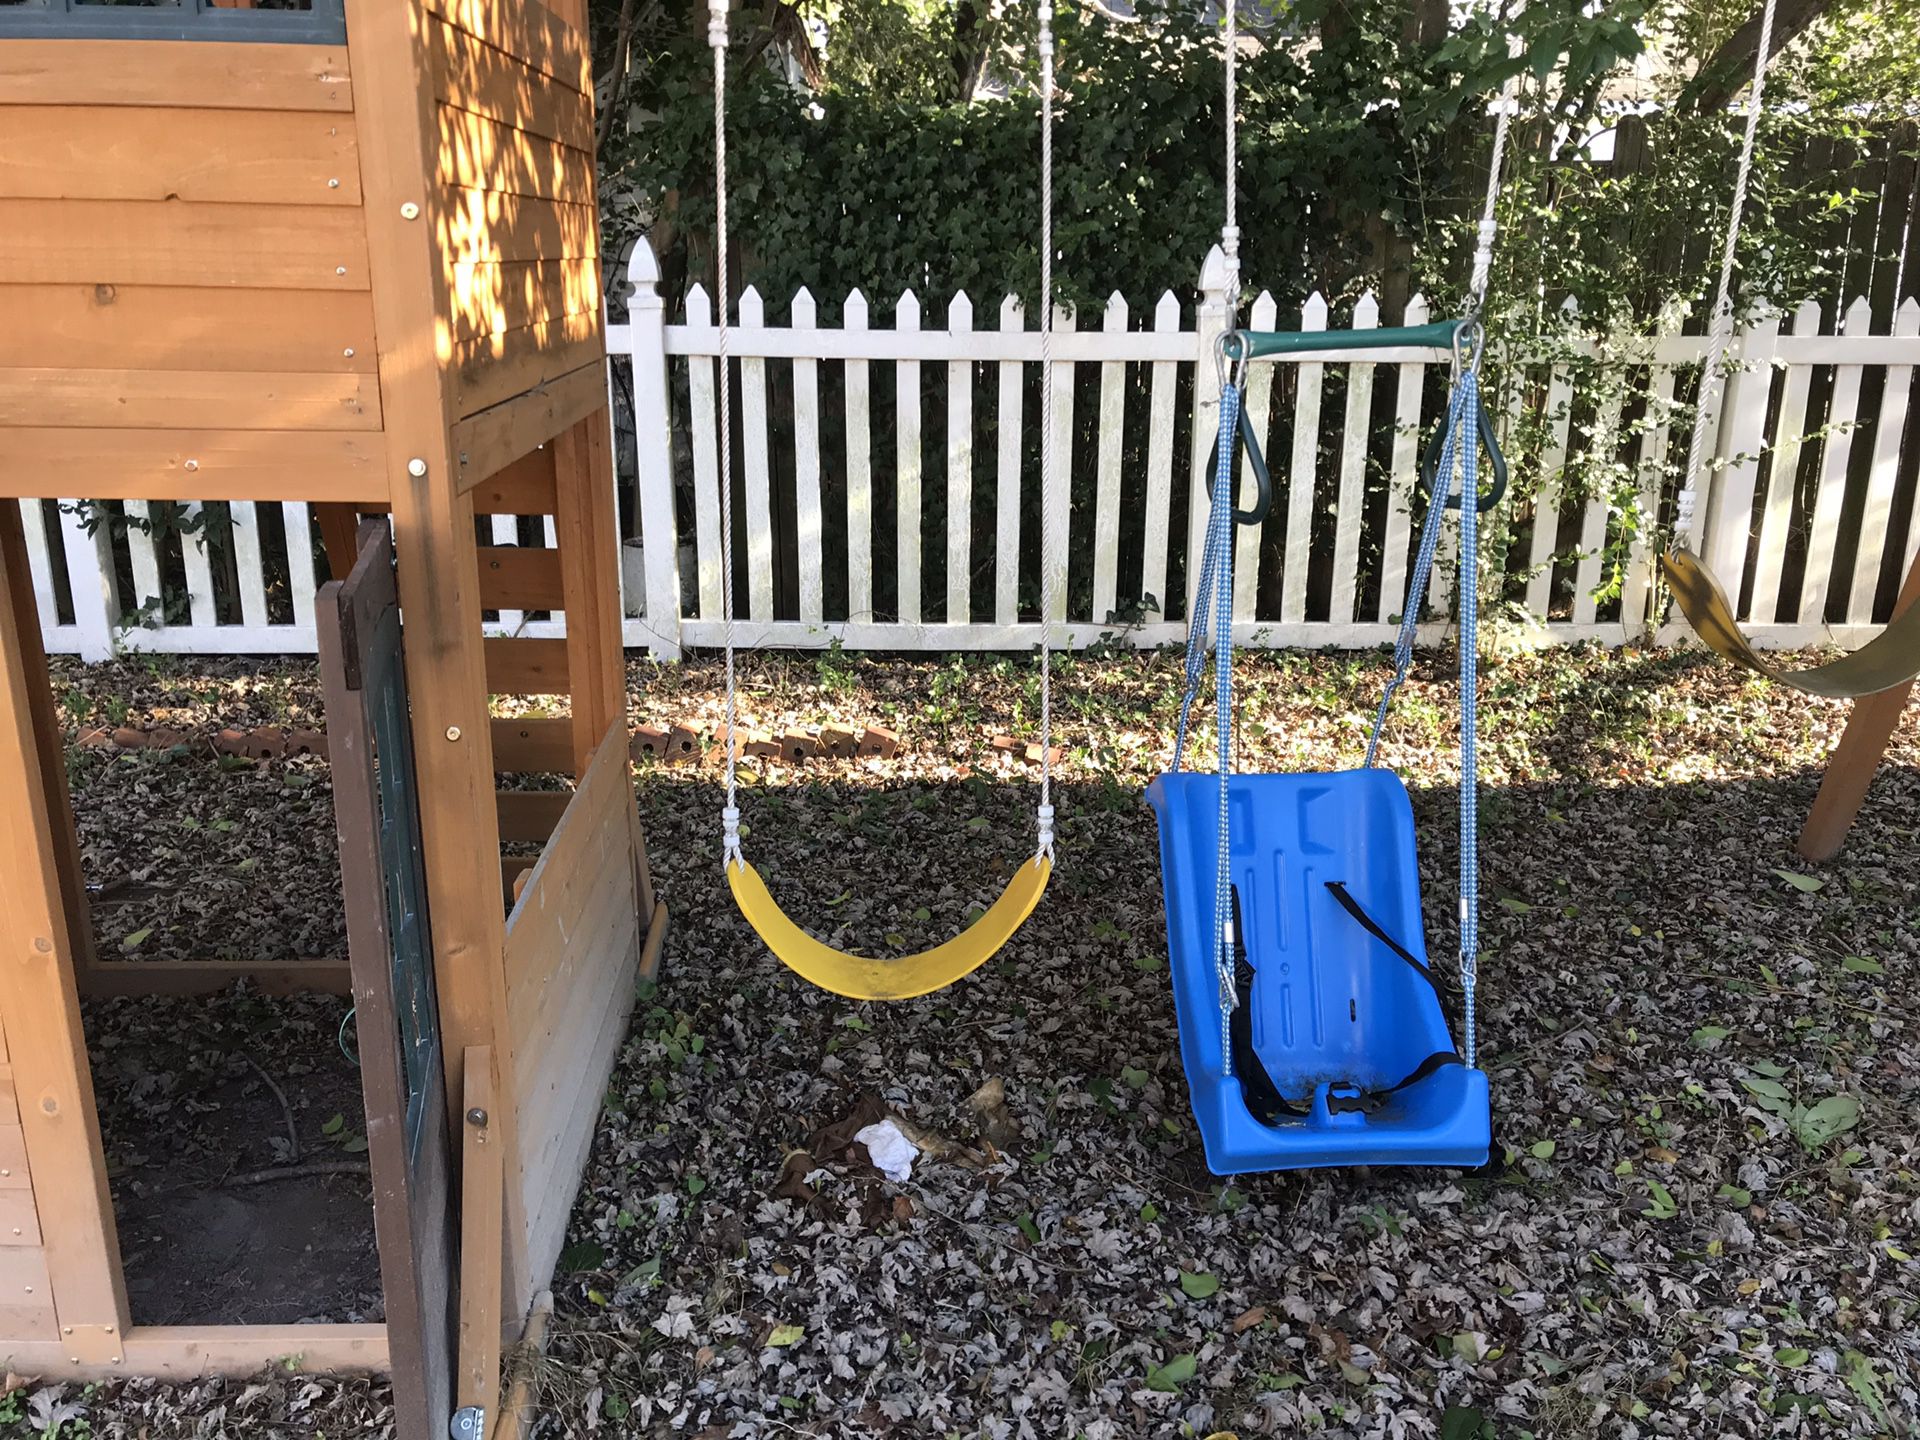 Swing set new 2018 Virginia Beach va area- not including blue swing, yes other 2 included